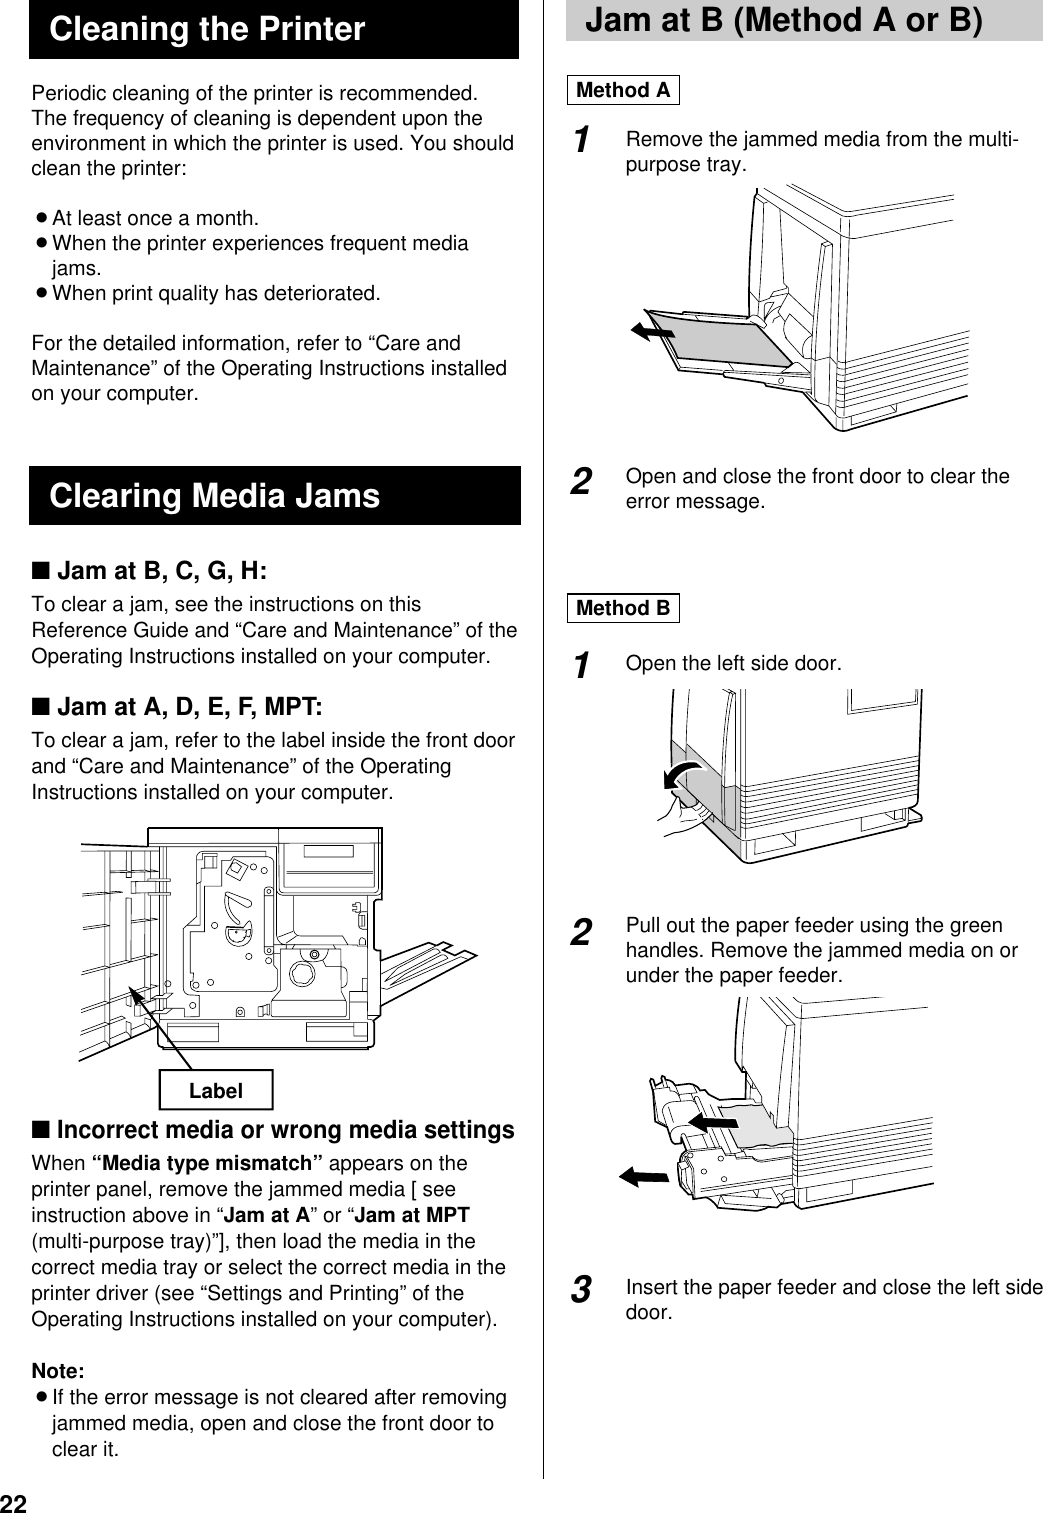 22Periodic cleaning of the printer is recommended.The frequency of cleaning is dependent upon theenvironment in which the printer is used. You shouldclean the printer:BAt least once a month.BWhen the printer experiences frequent mediajams.BWhen print quality has deteriorated.For the detailed information, refer to “Care andMaintenance” of the Operating Instructions installedon your computer.■Jam at B, C, G, H:To clear a jam, see the instructions on thisReference Guide and “Care and Maintenance” of theOperating Instructions installed on your computer.■Jam at A, D, E, F, MPT:To clear a jam, refer to the label inside the front doorand “Care and Maintenance” of the OperatingInstructions installed on your computer.■ Incorrect media or wrong media settingsWhen “Media type mismatch” appears on theprinter panel, remove the jammed media [ seeinstruction above in “Jam at A” or “Jam at MPT(multi-purpose tray)”], then load the media in thecorrect media tray or select the correct media in theprinter driver (see “Settings and Printing” of theOperating Instructions installed on your computer).Note:BIf the error message is not cleared after removingjammed media, open and close the front door toclear it.Remove the jammed media from the multi-purpose tray.Open and close the front door to clear theerror message.Open the left side door.Pull out the paper feeder using the greenhandles. Remove the jammed media on orunder the paper feeder.Insert the paper feeder and close the left sidedoor.Clearing Media JamsLabel2Method AMethod B2113Jam at B (Method A or B)Cleaning the Printer